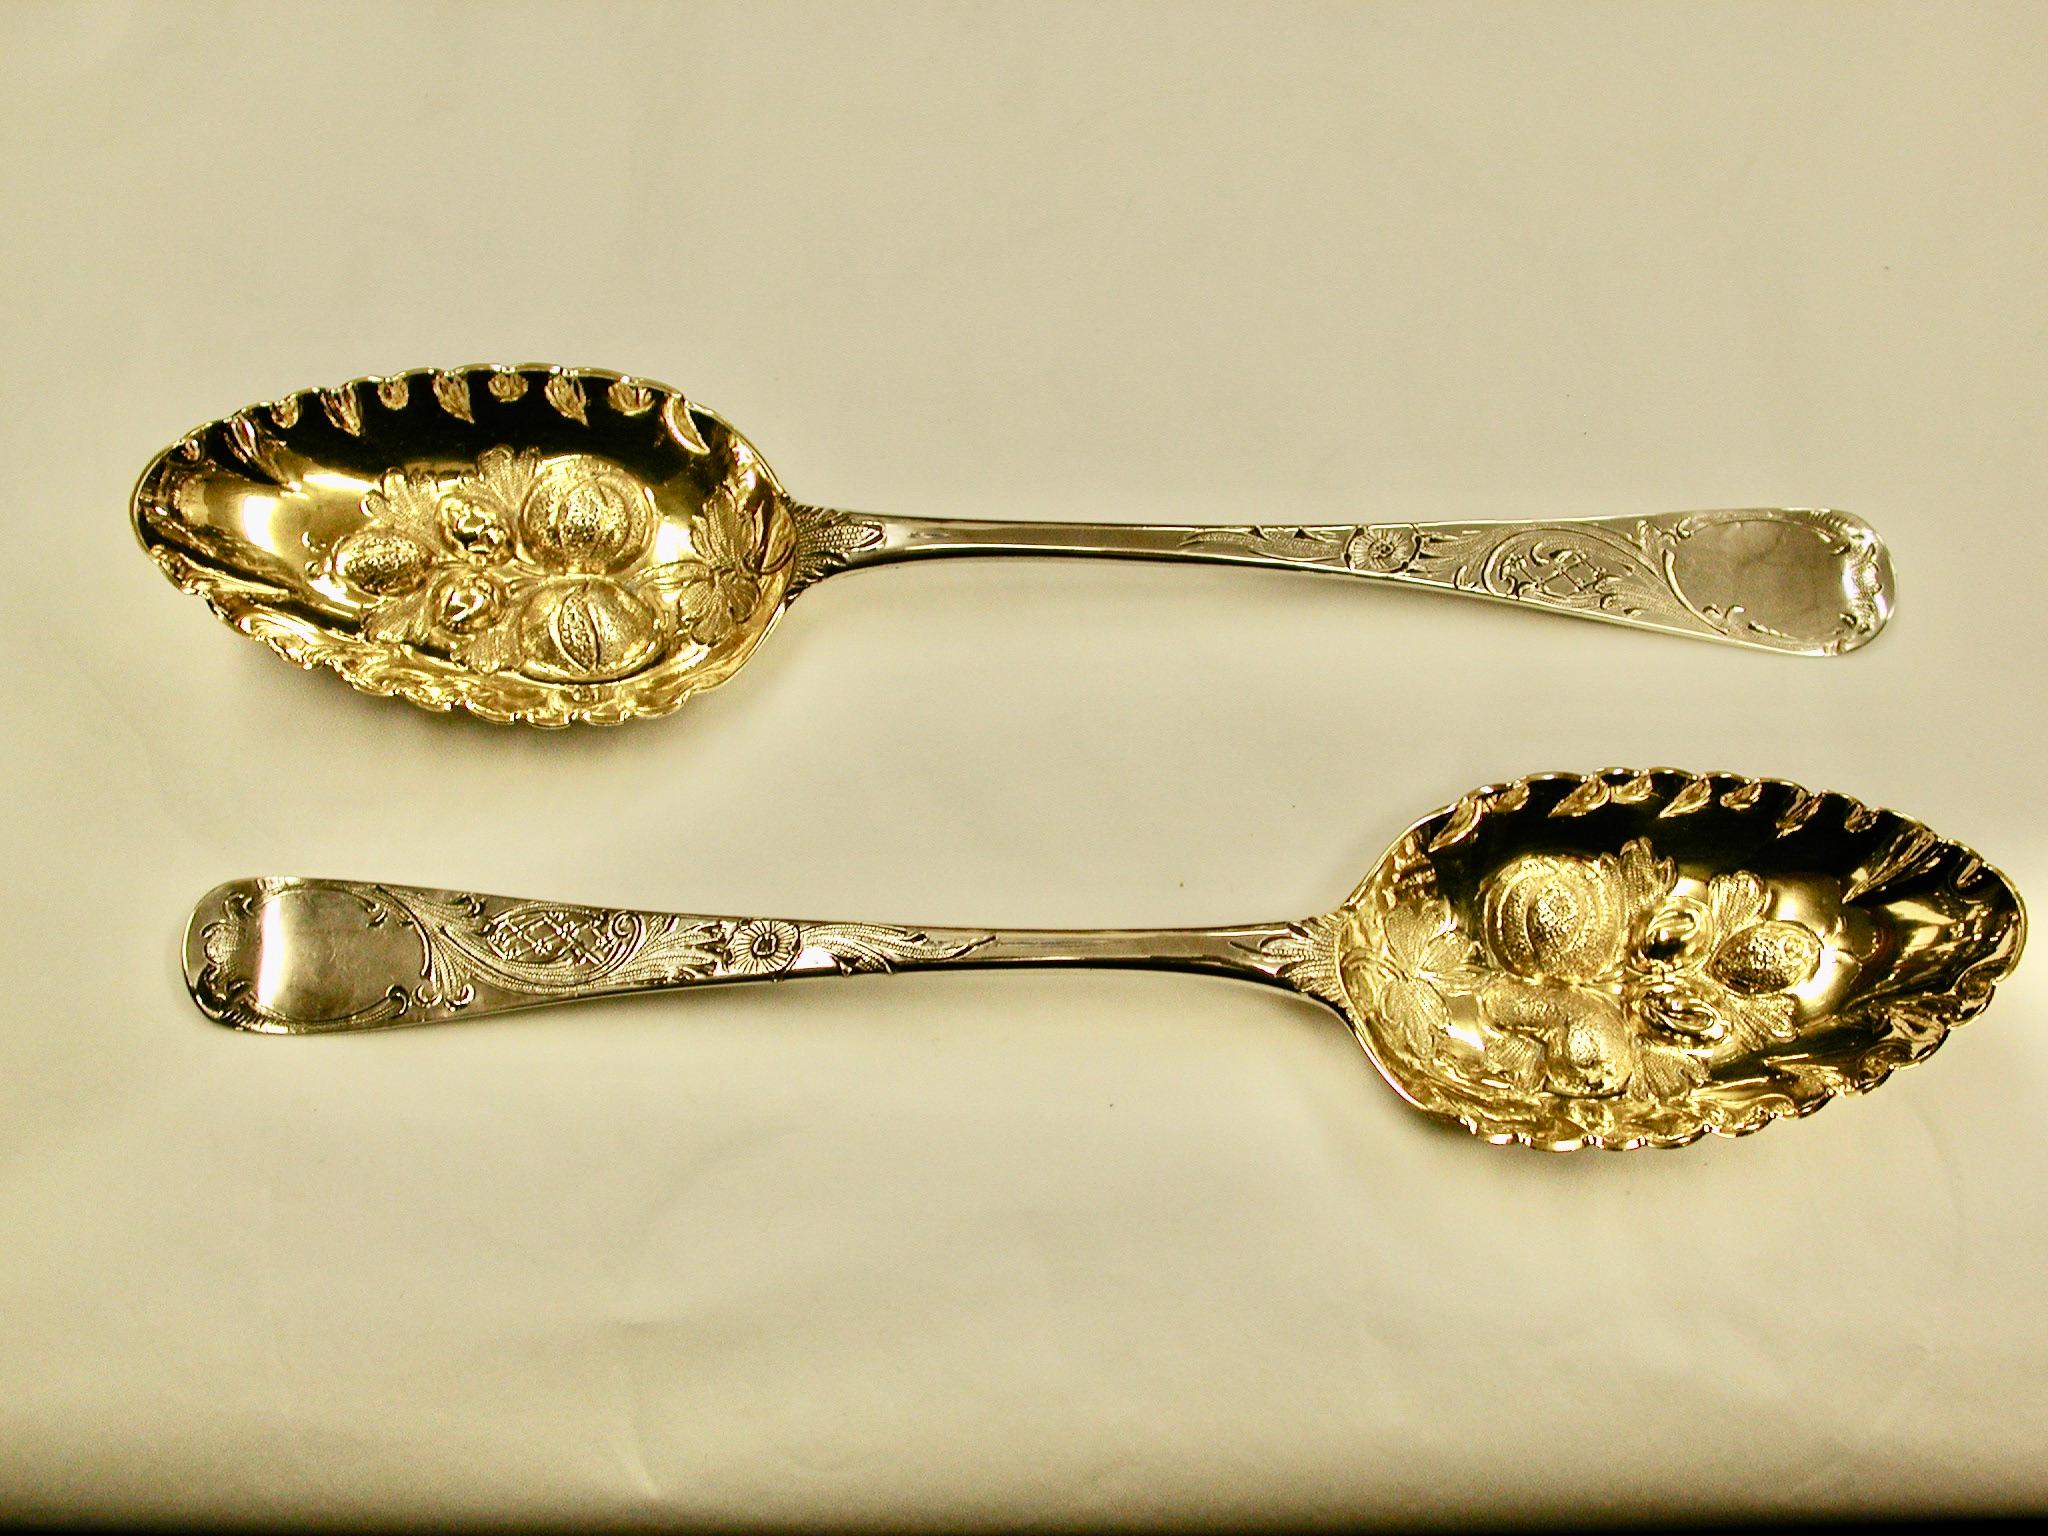 English Pair of George 111 Silver Berry Spoons with Matching Sugar Sifter, 1799-1805